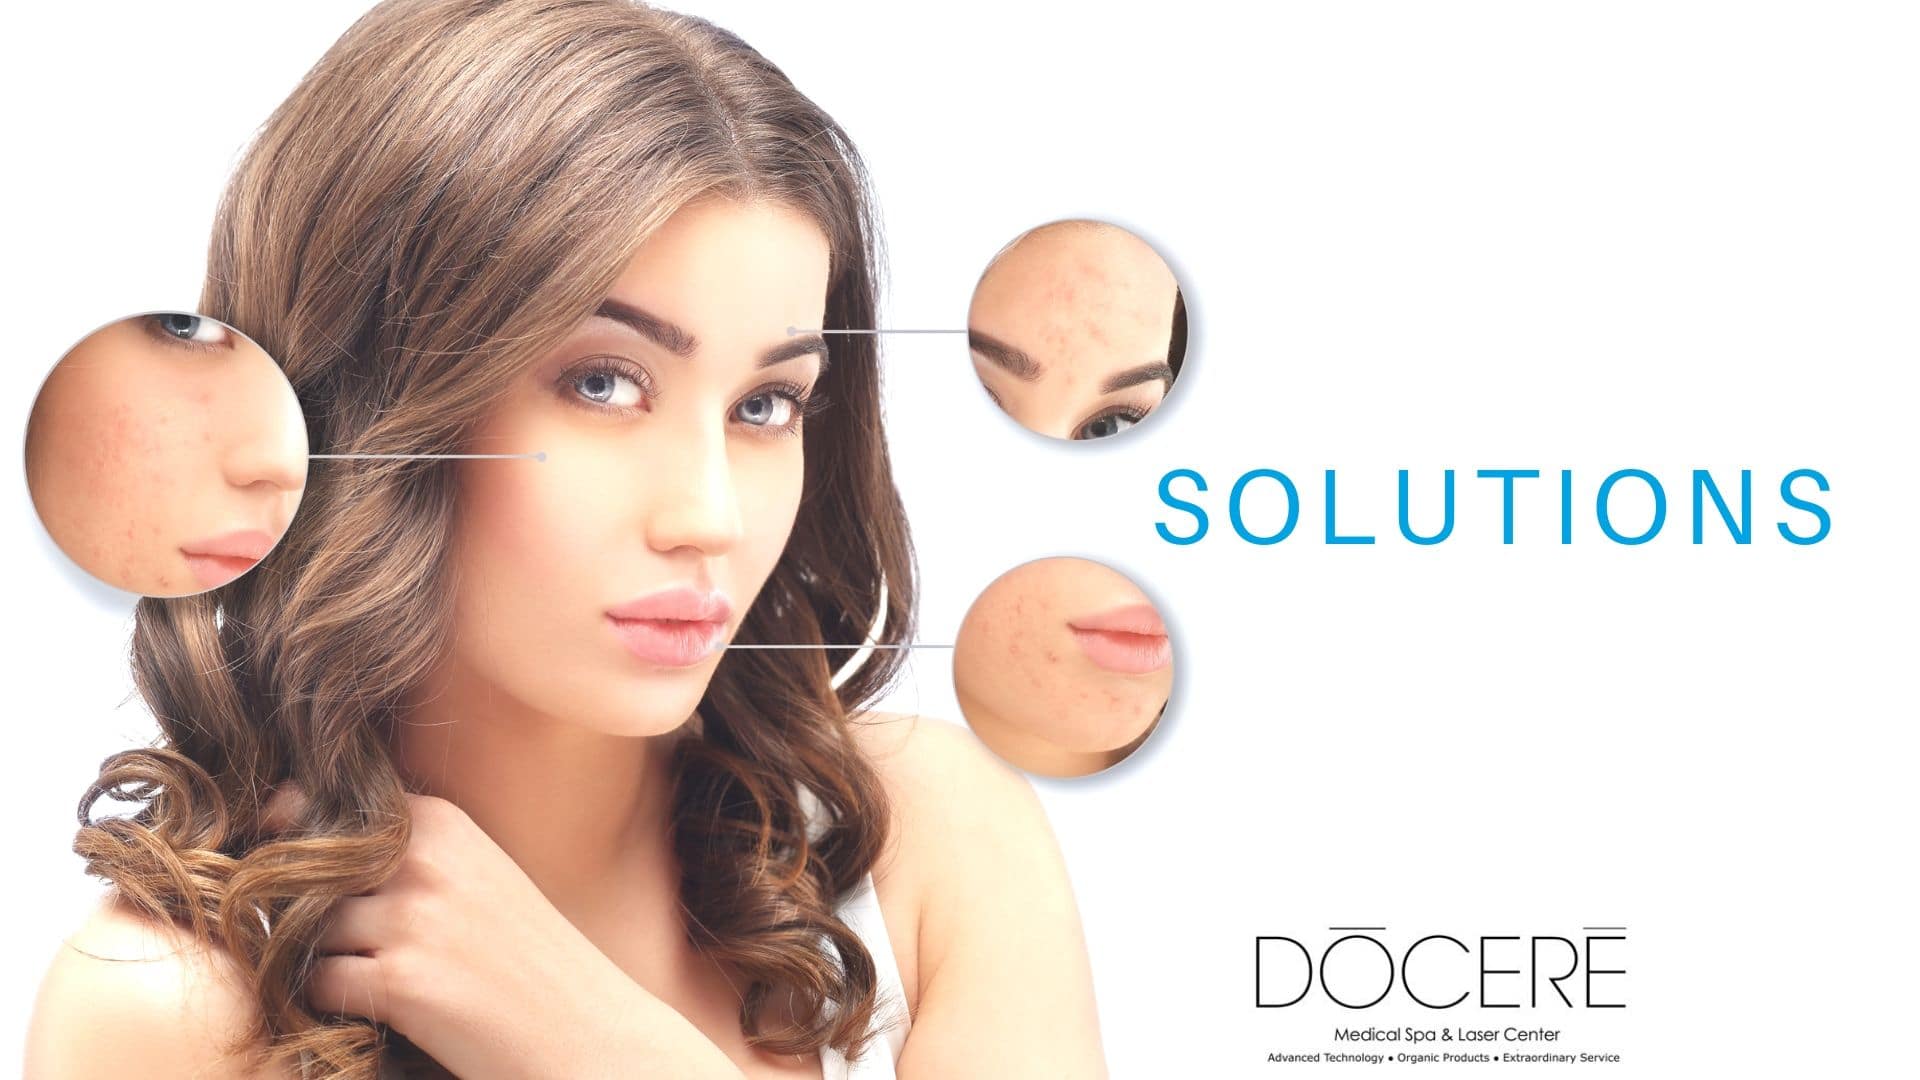 Woman showing her clear skin after skincare solutions were provided from docere medspa, to make her skin beautiful.